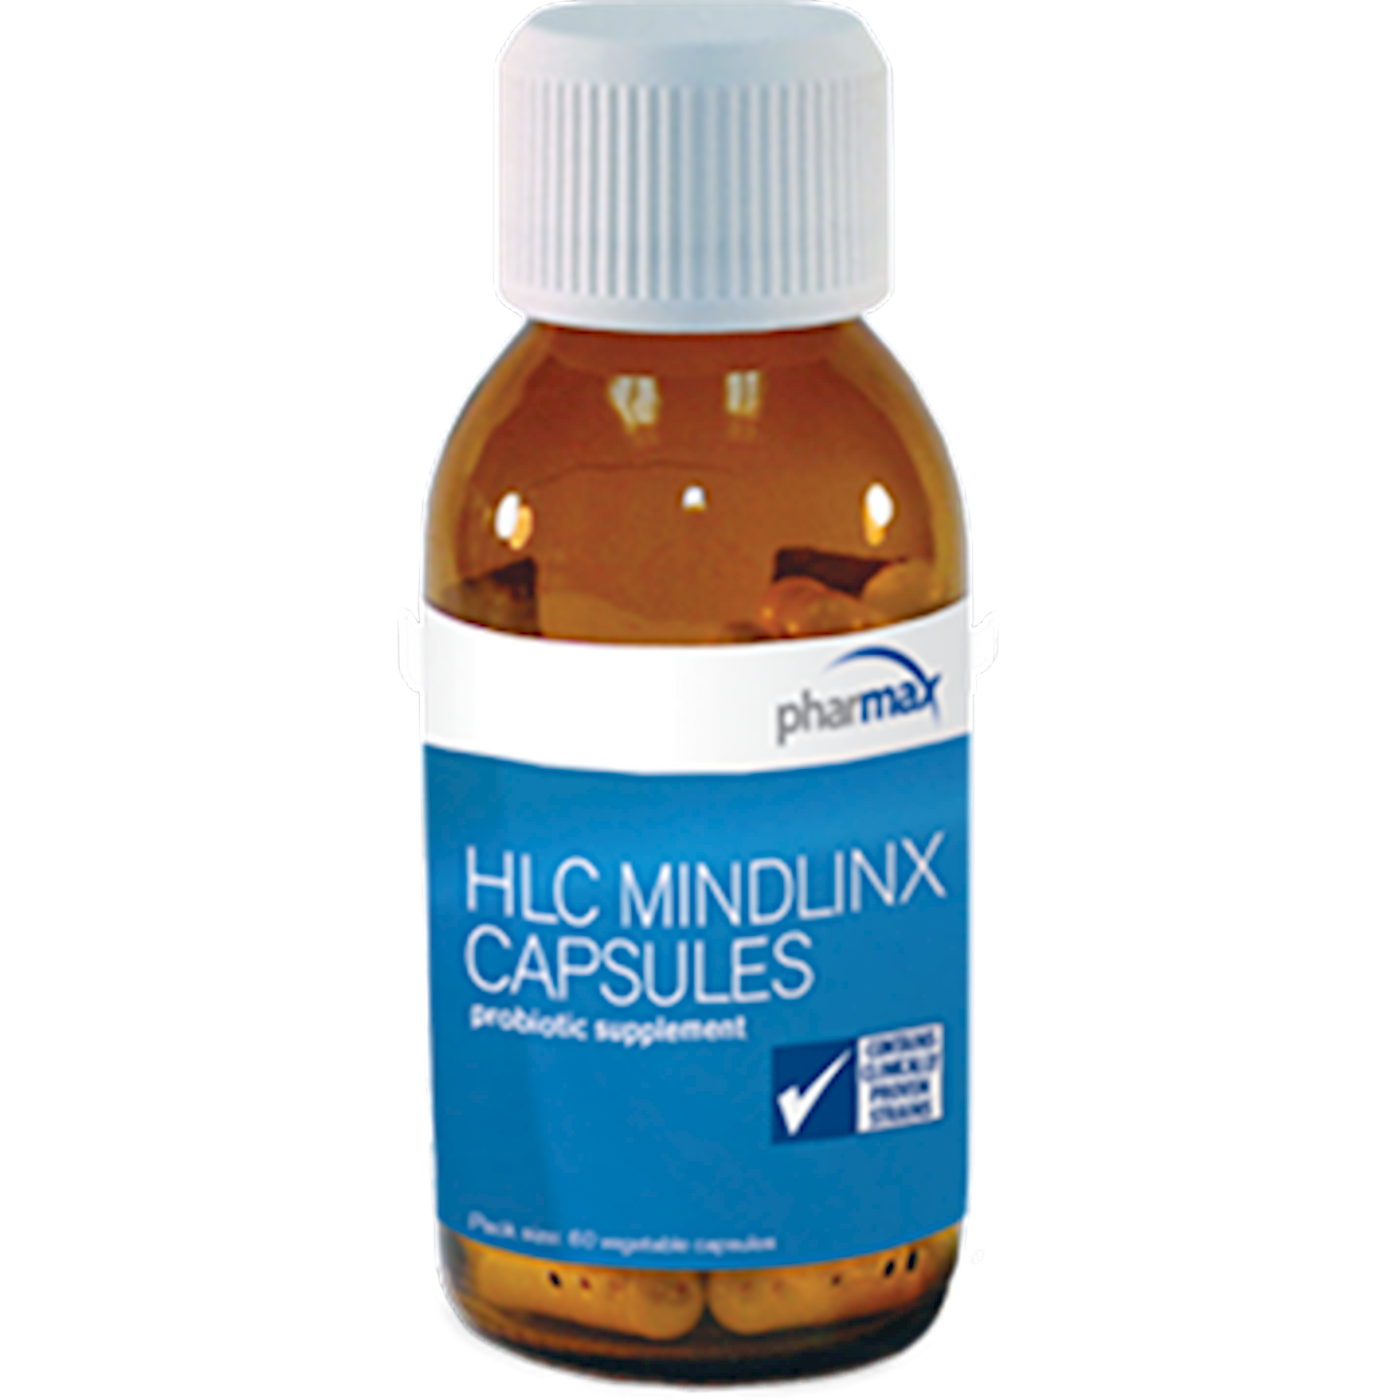 HLC MindLinx Capsules 60 vcaps Curated Wellness